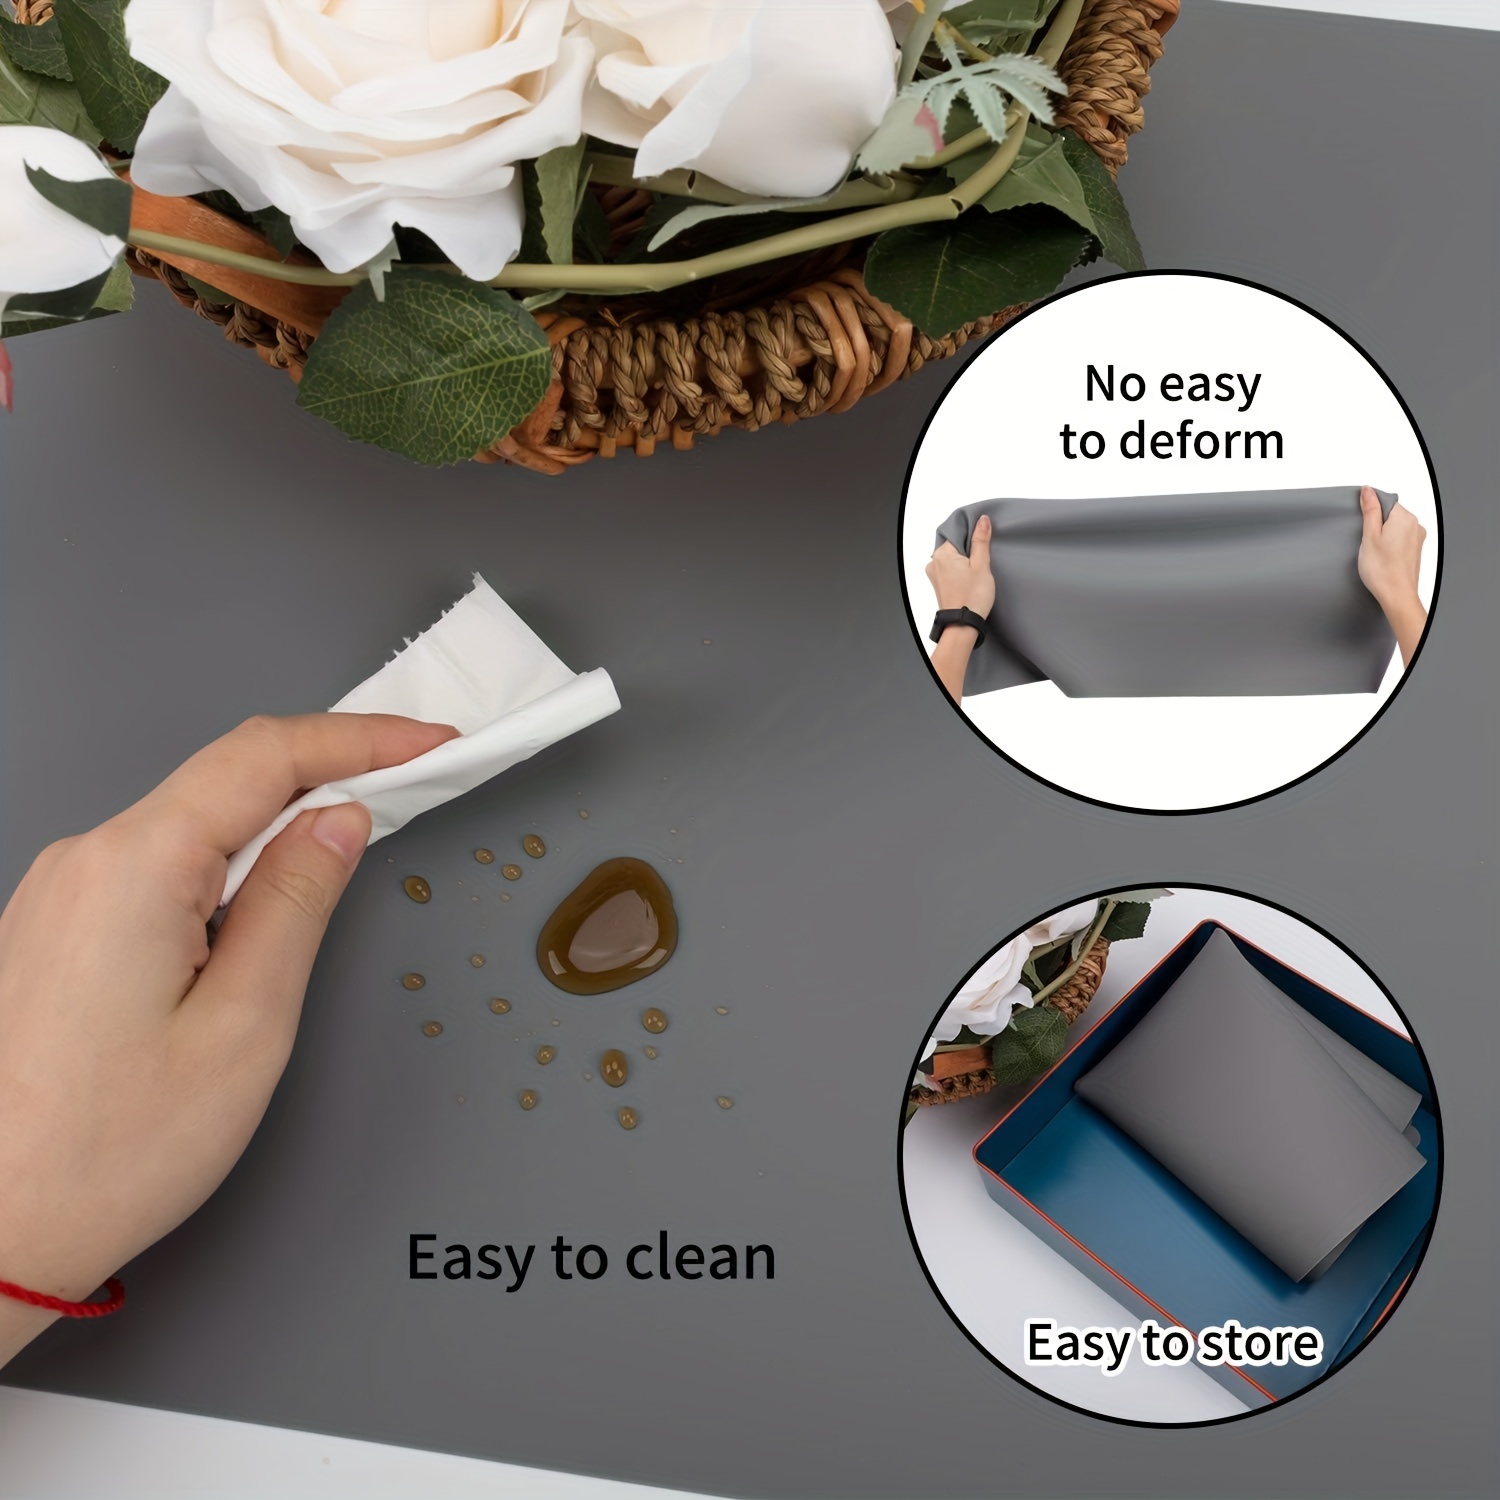 Extra Large Silicone Countertop Mat Silicone Table Mat Kitchen